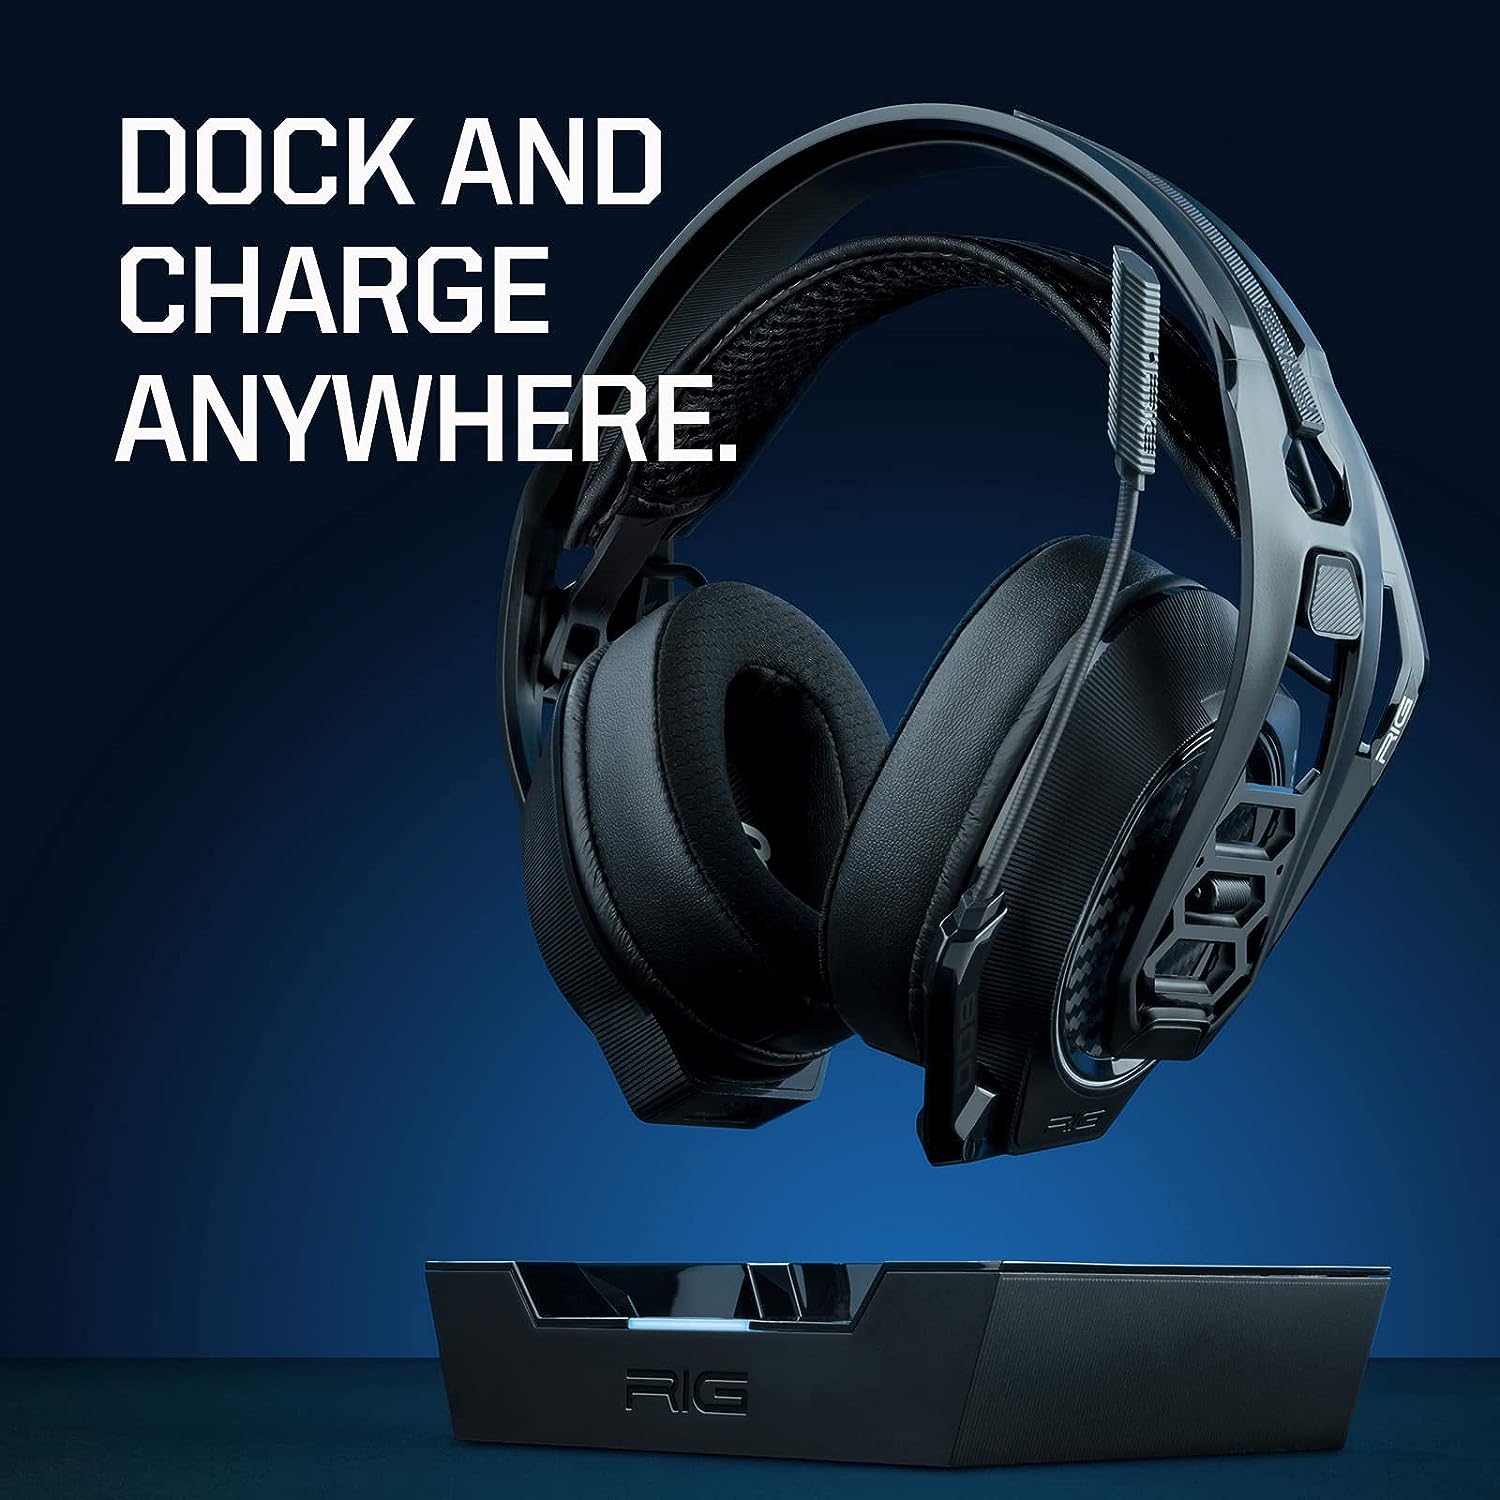 Inspecting RIG 800 PRO HS Wireless Gaming Headset and Multi-Function Base Station